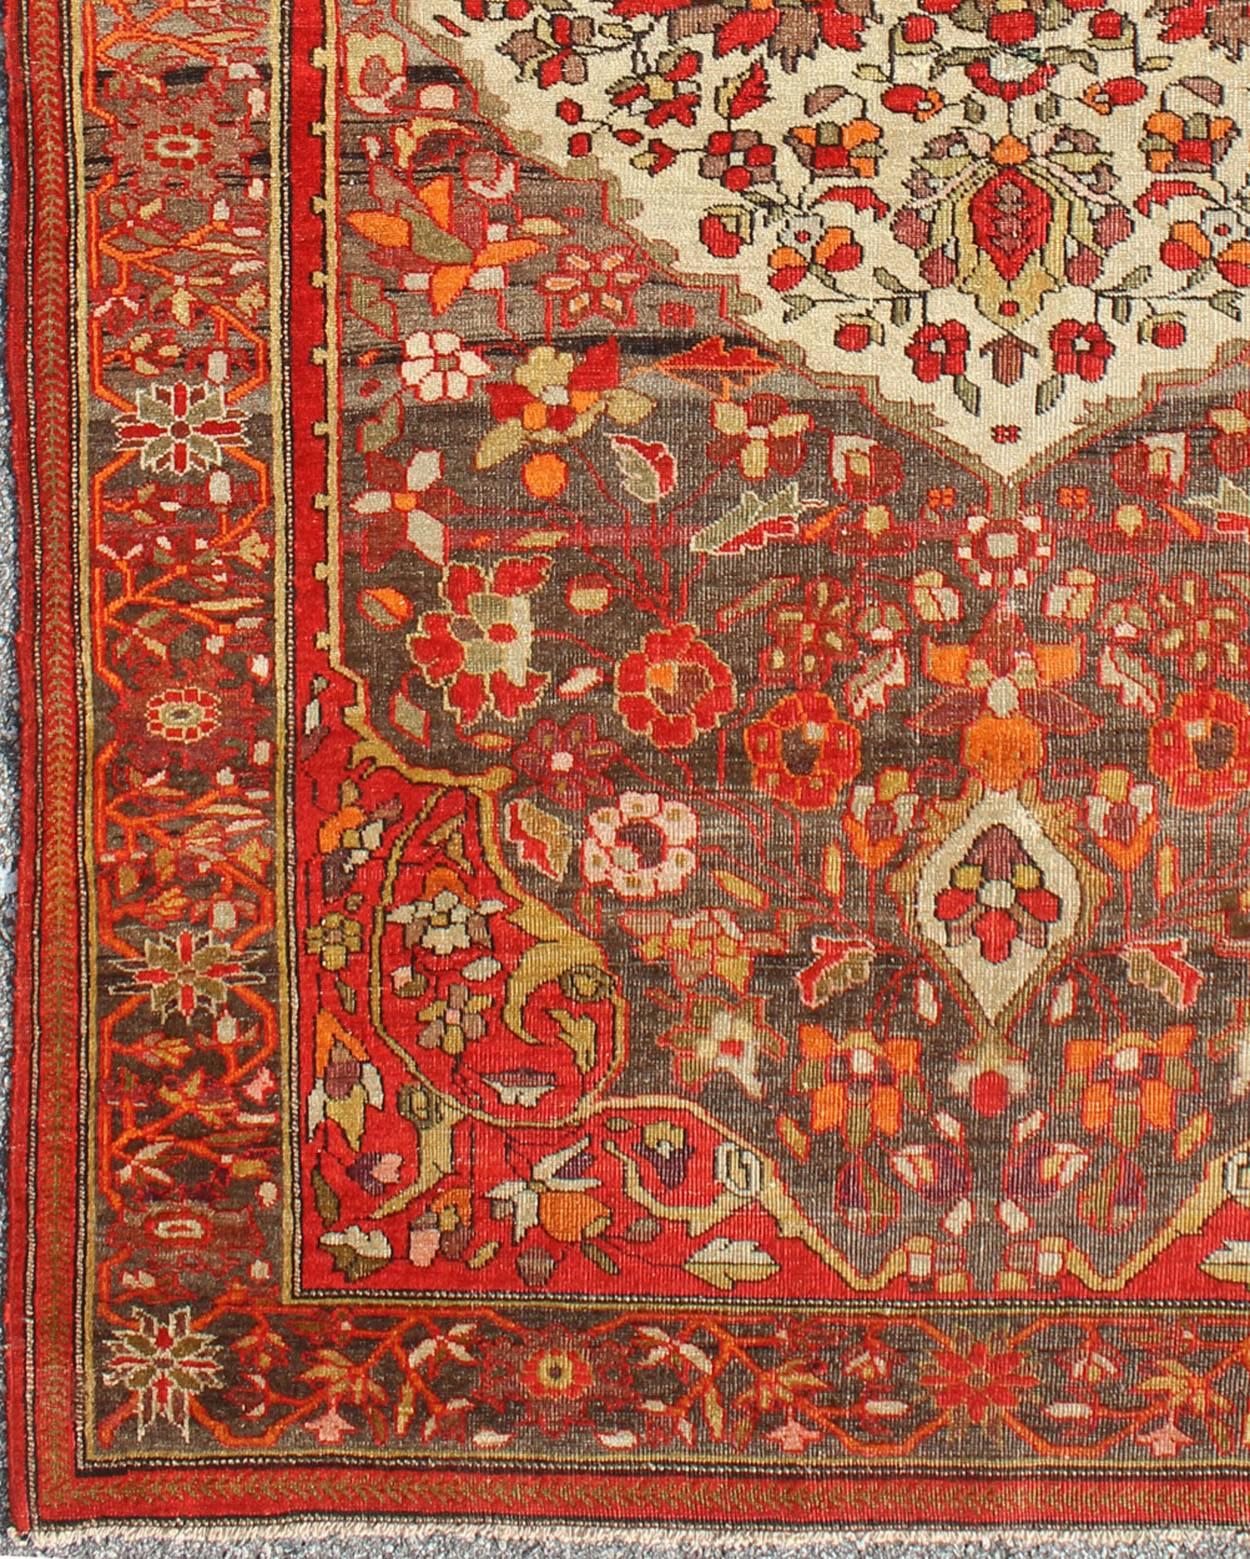 Sarouk Farahan with Florals and Vine Scrolls in Red
rug/16-1112,   origin/iran 

This outstanding antique Farahan Sarouk carpet is primarily characterized by its classical composition. This beautiful carpet represents the highest levels of mastery